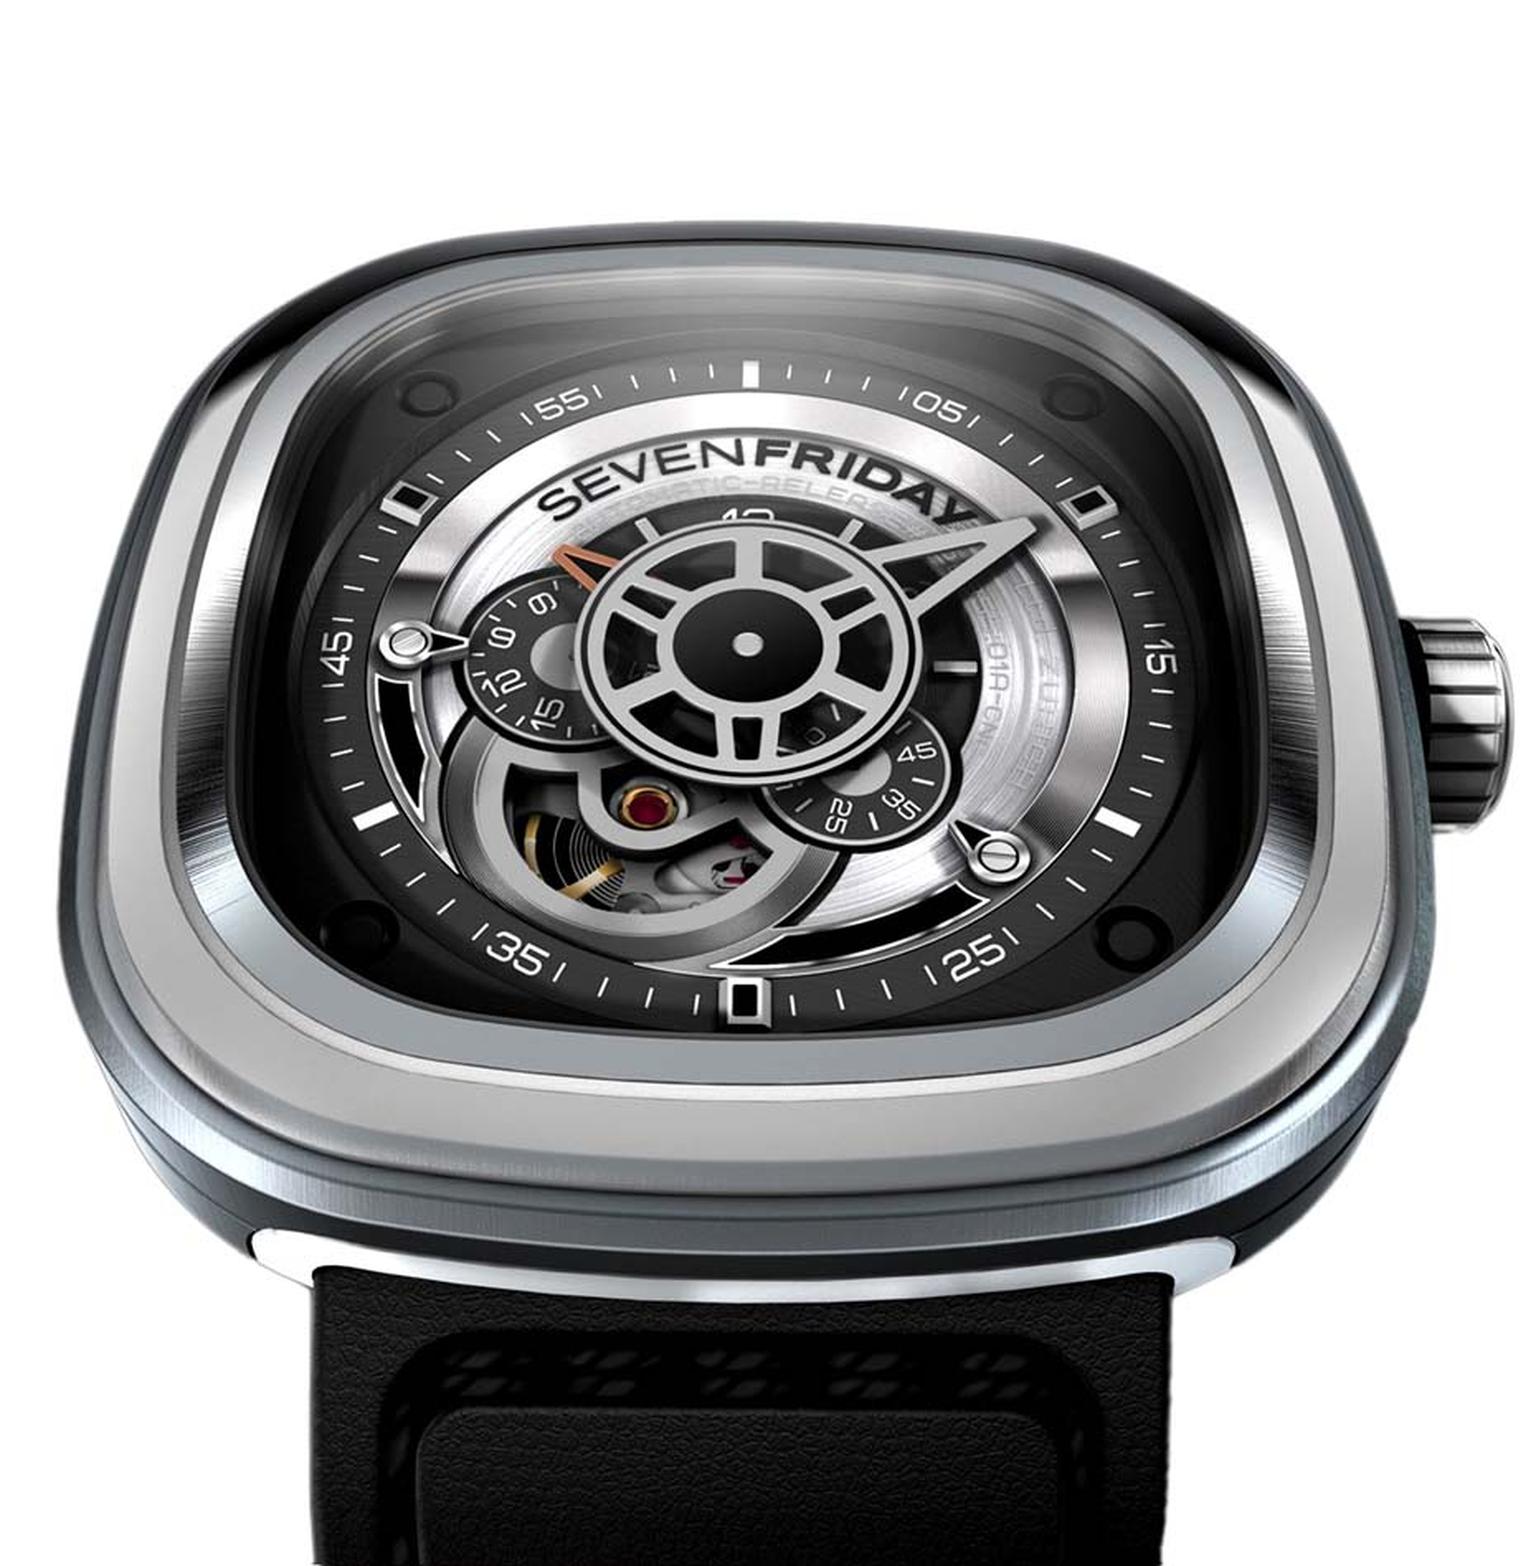 SevenFriday P1-1 watch in stainless steel (£641)